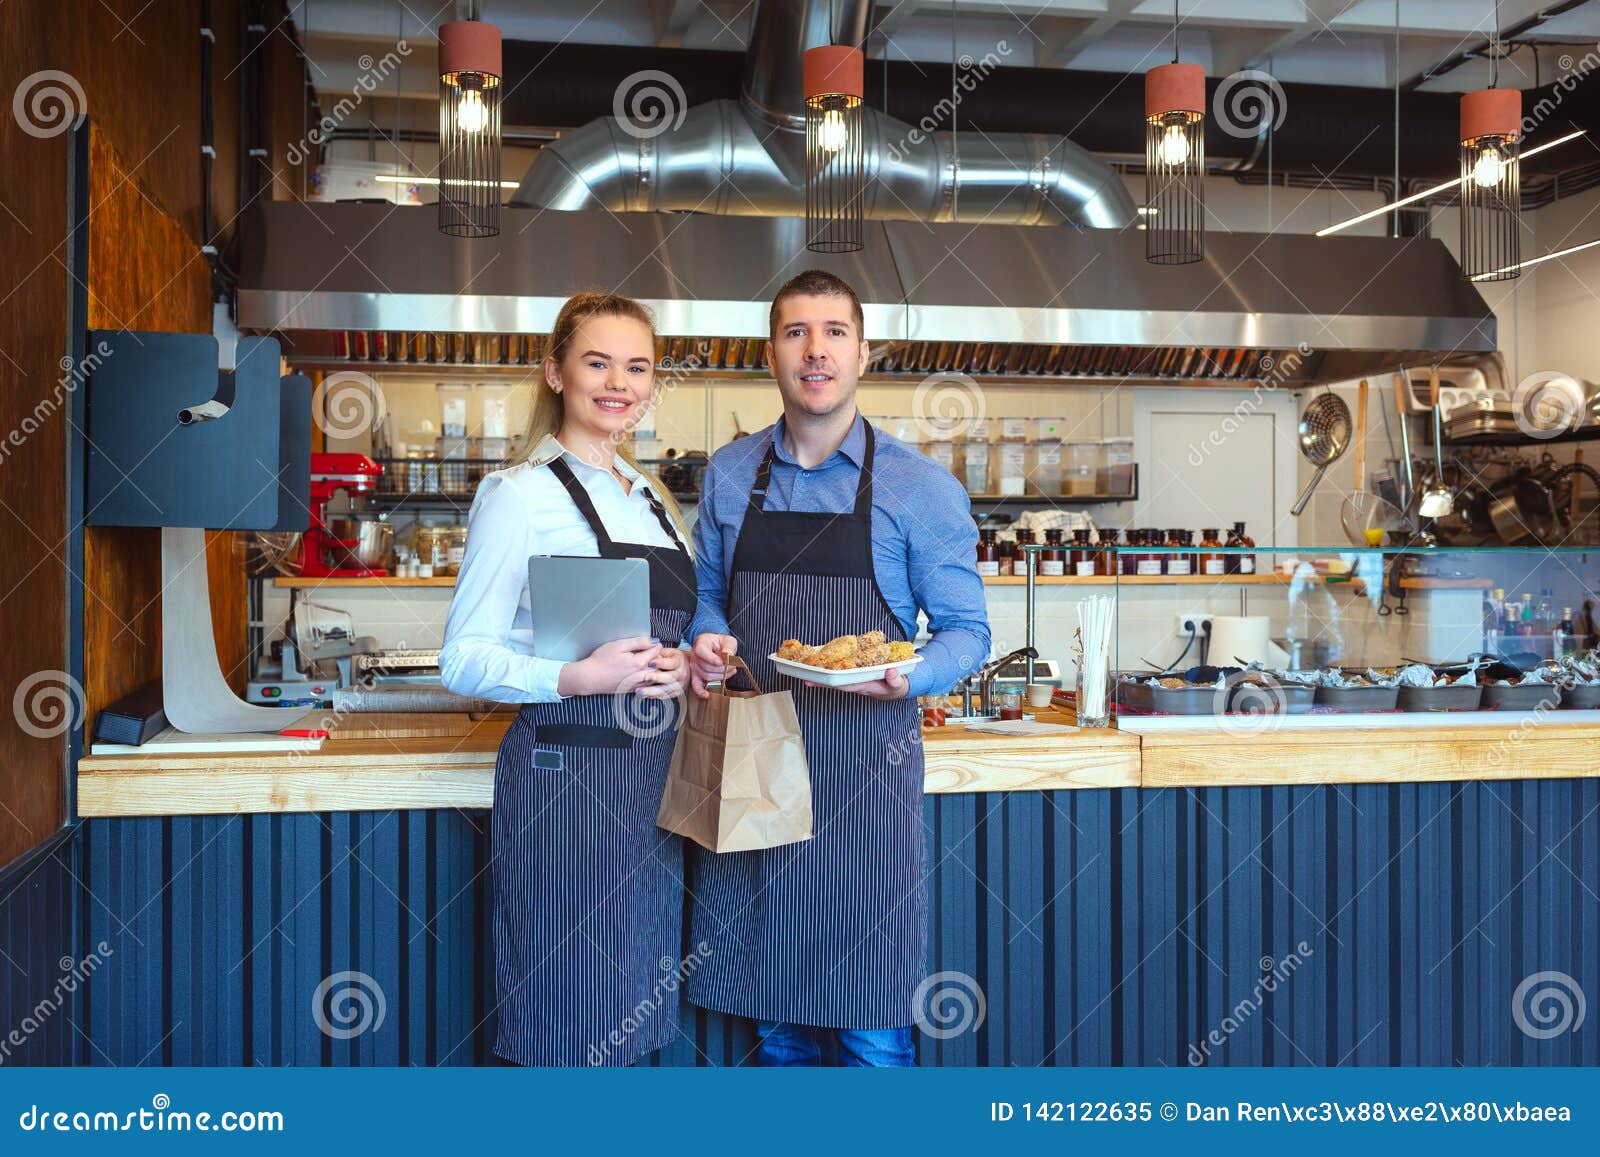 smiling young man and woman using tablet at small eatery restaurant